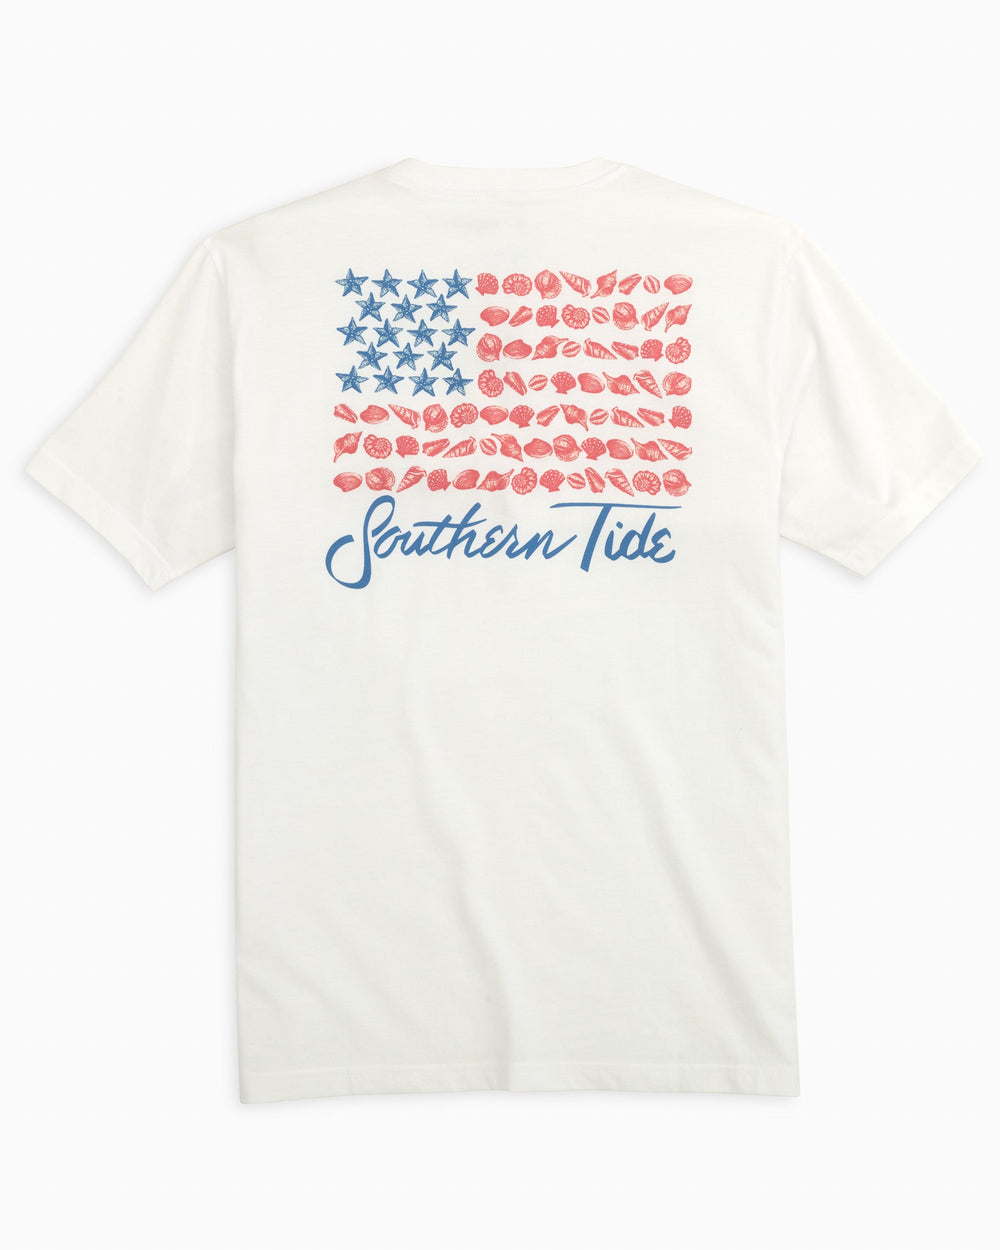 The back view of the Women's Sea to Shining Sea Shell T-Shirt by Southern Tide - Classic White